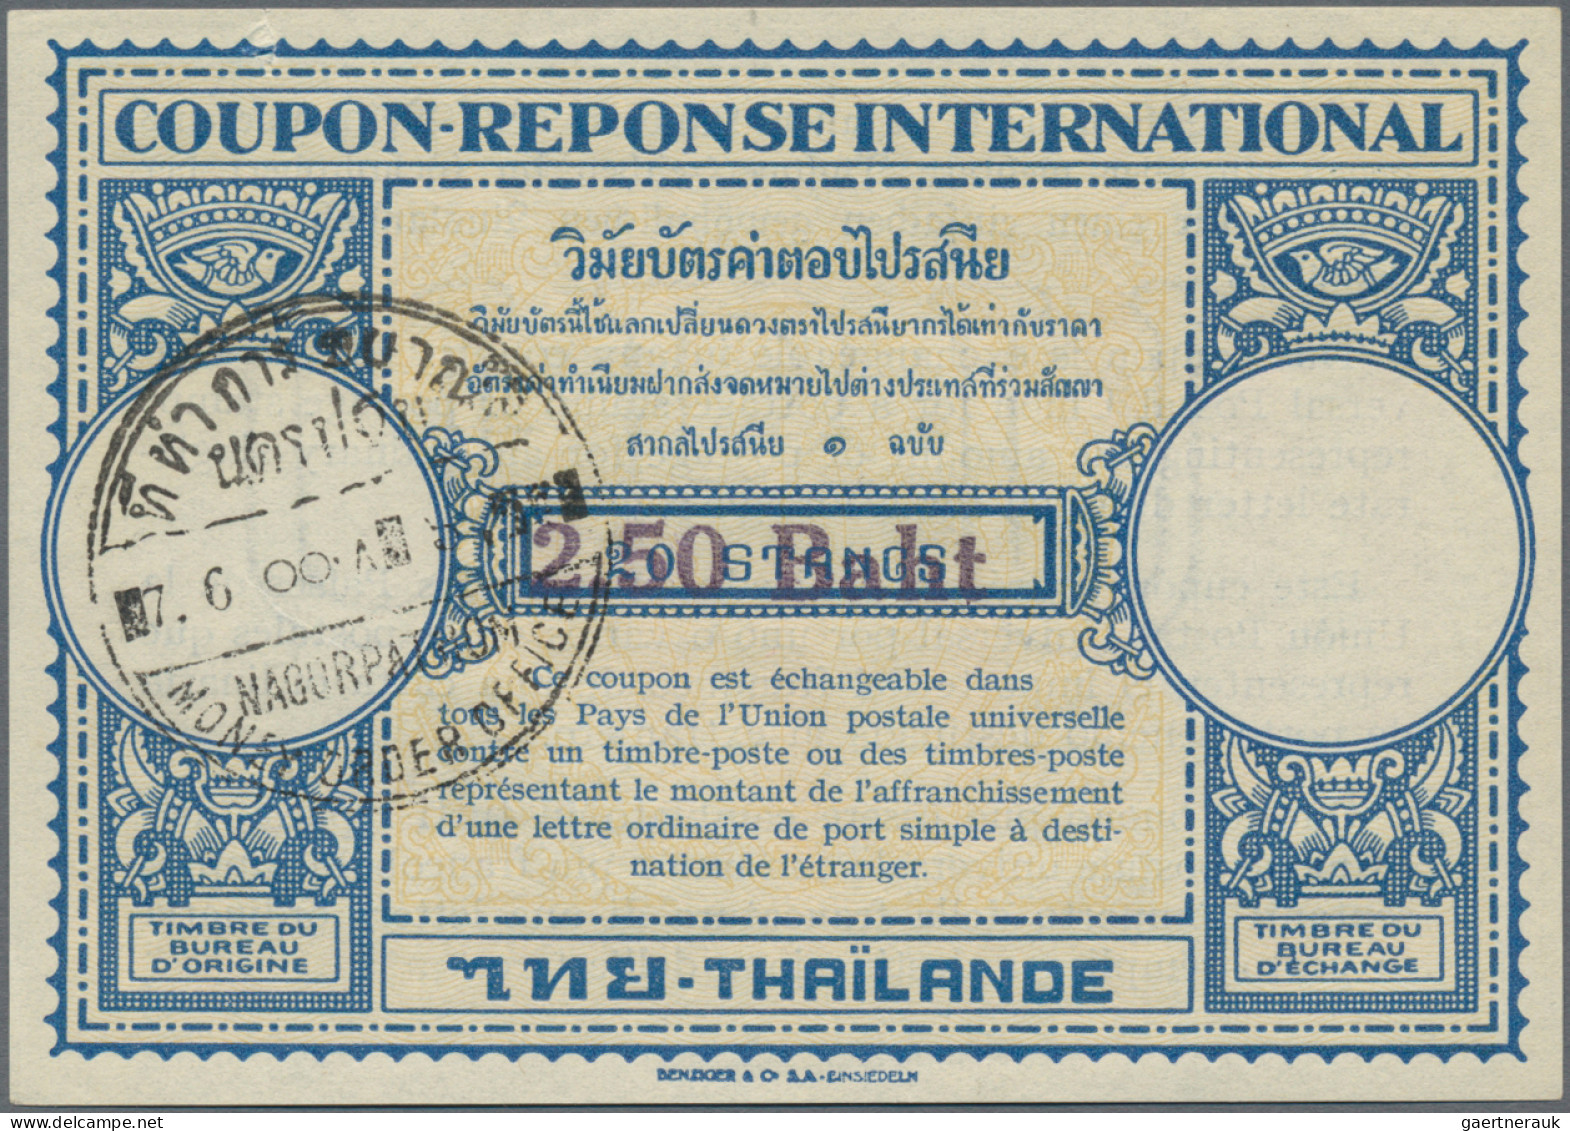 Thailand - Postal Stationery: 1957/2018 Collection Of 12 Intern. Reply Coupons, - Thailand